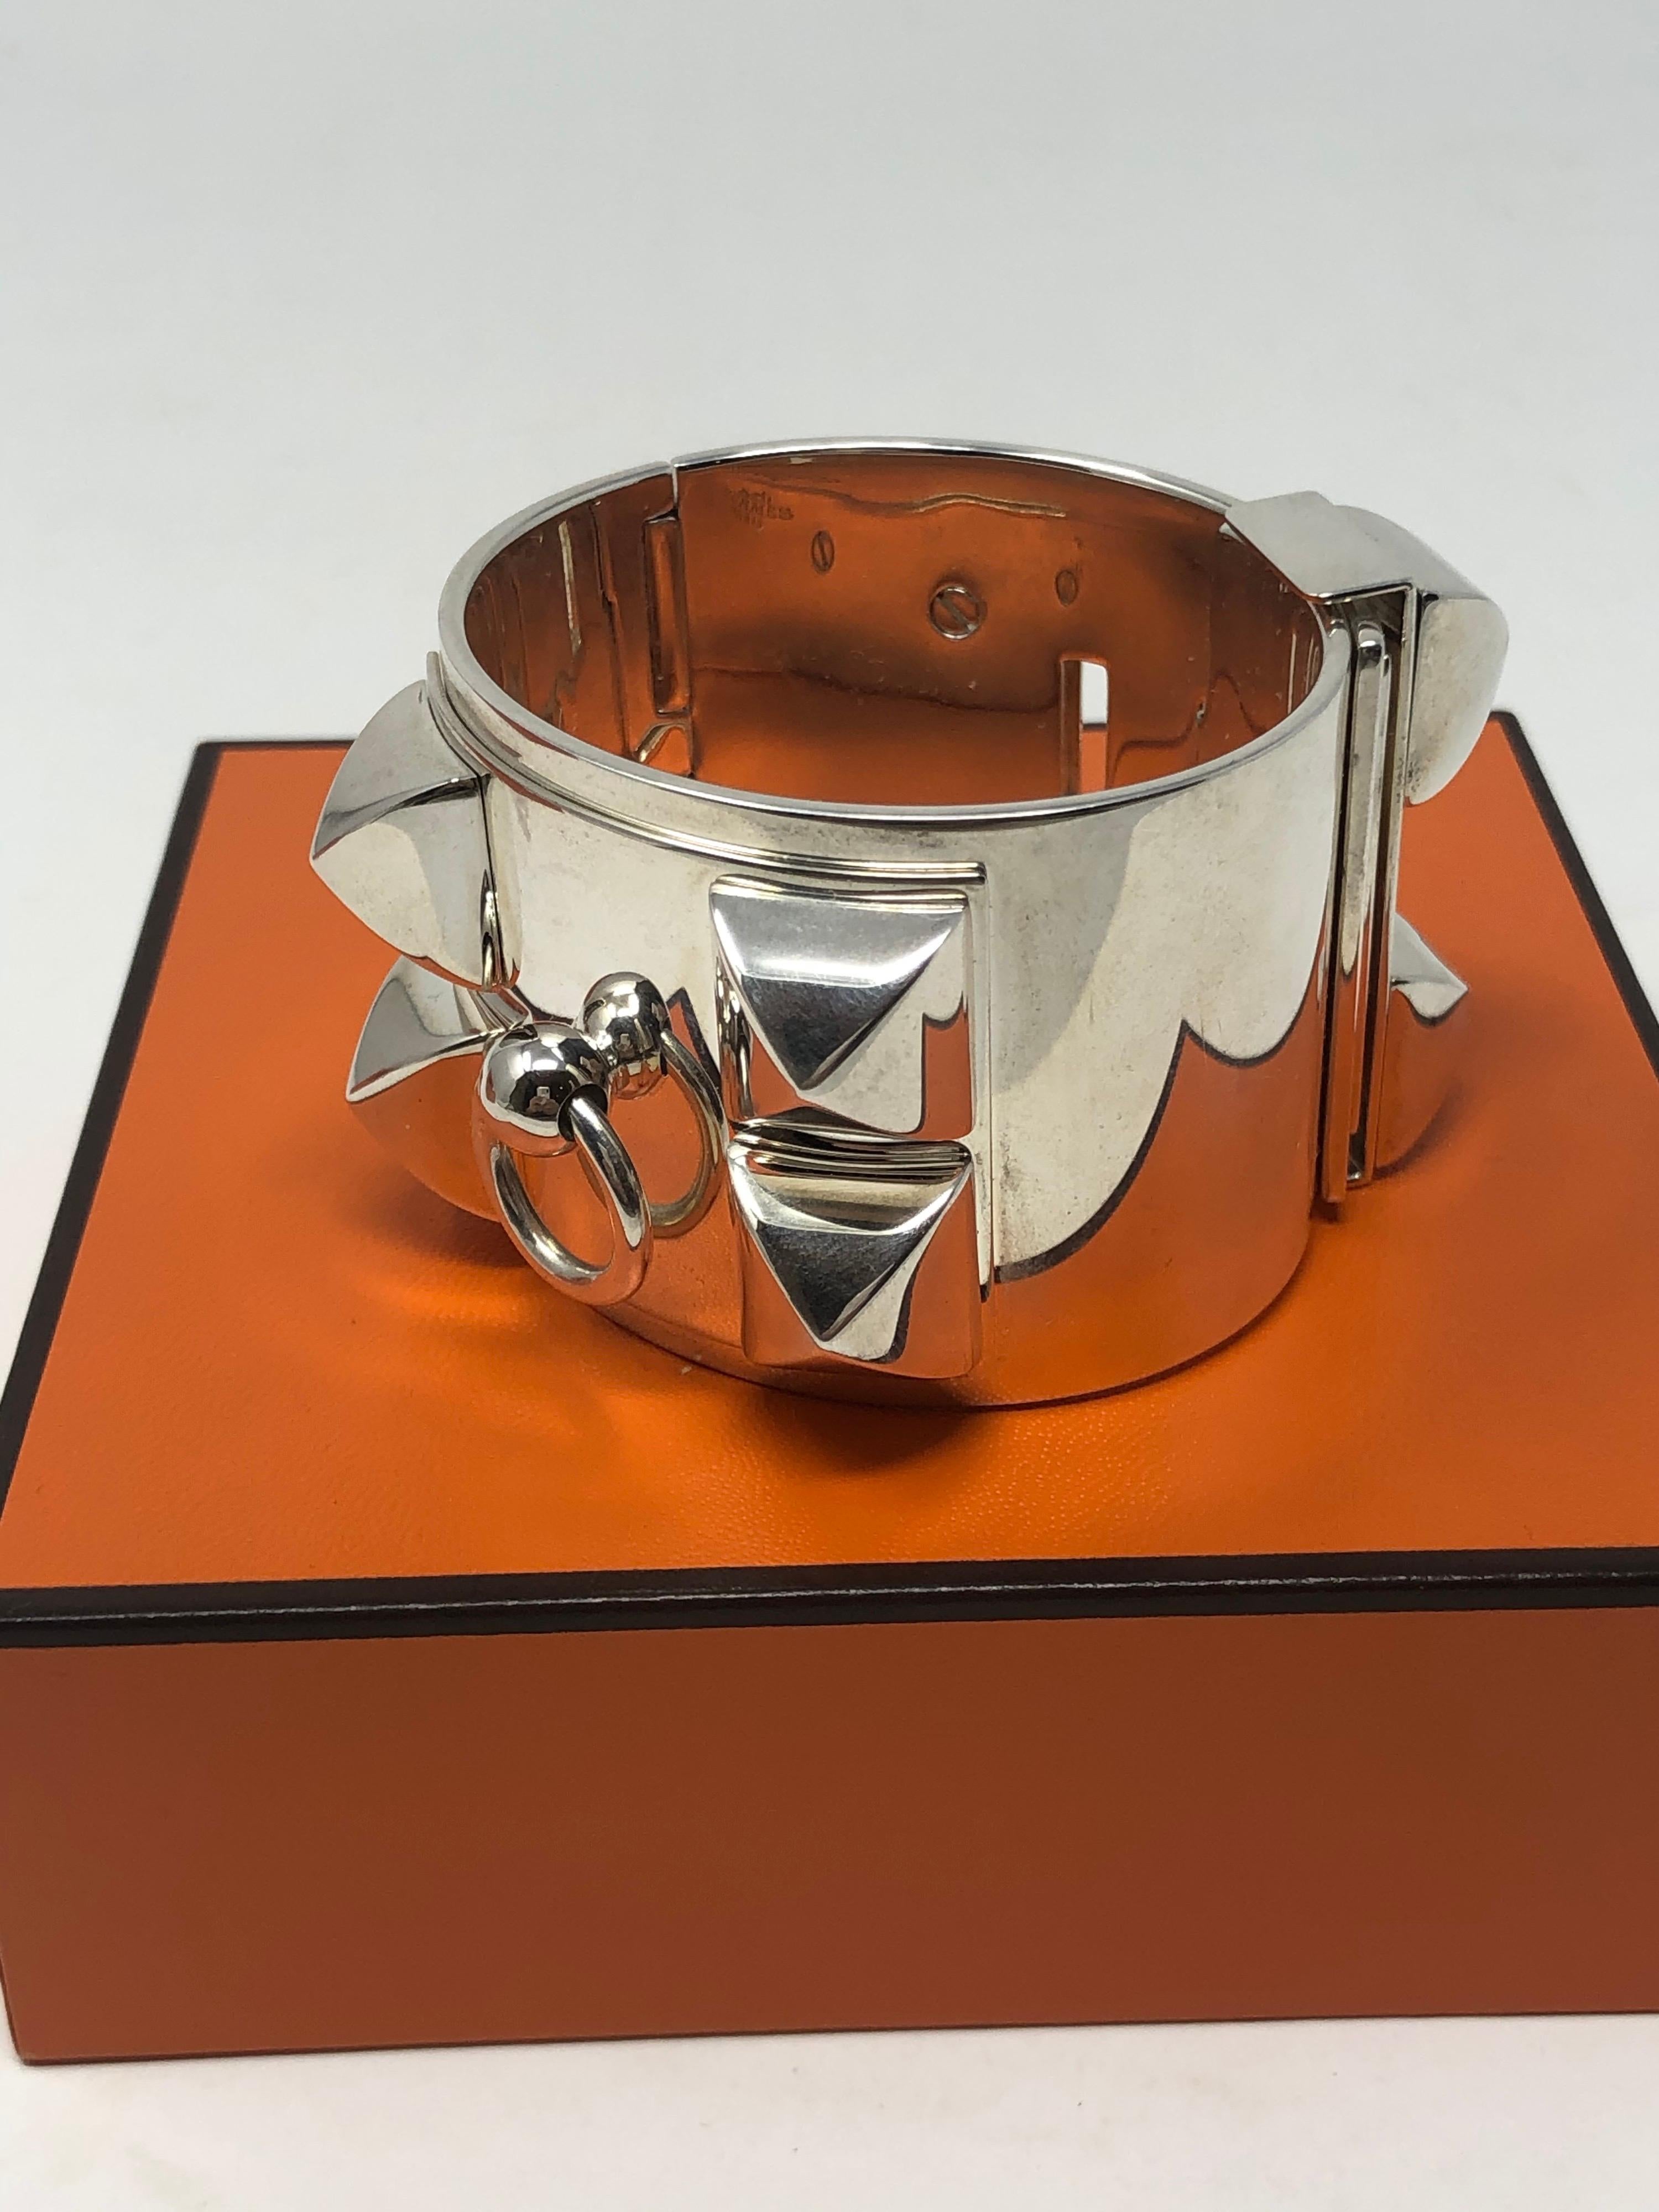 Hermes Collier De Chien Sterling Silver Bracelet. The most iconic CDC bracelet in all sterling silver. Sold out at Hermes. This one can be yours. Excellent condition. Guaranteed authentic. 